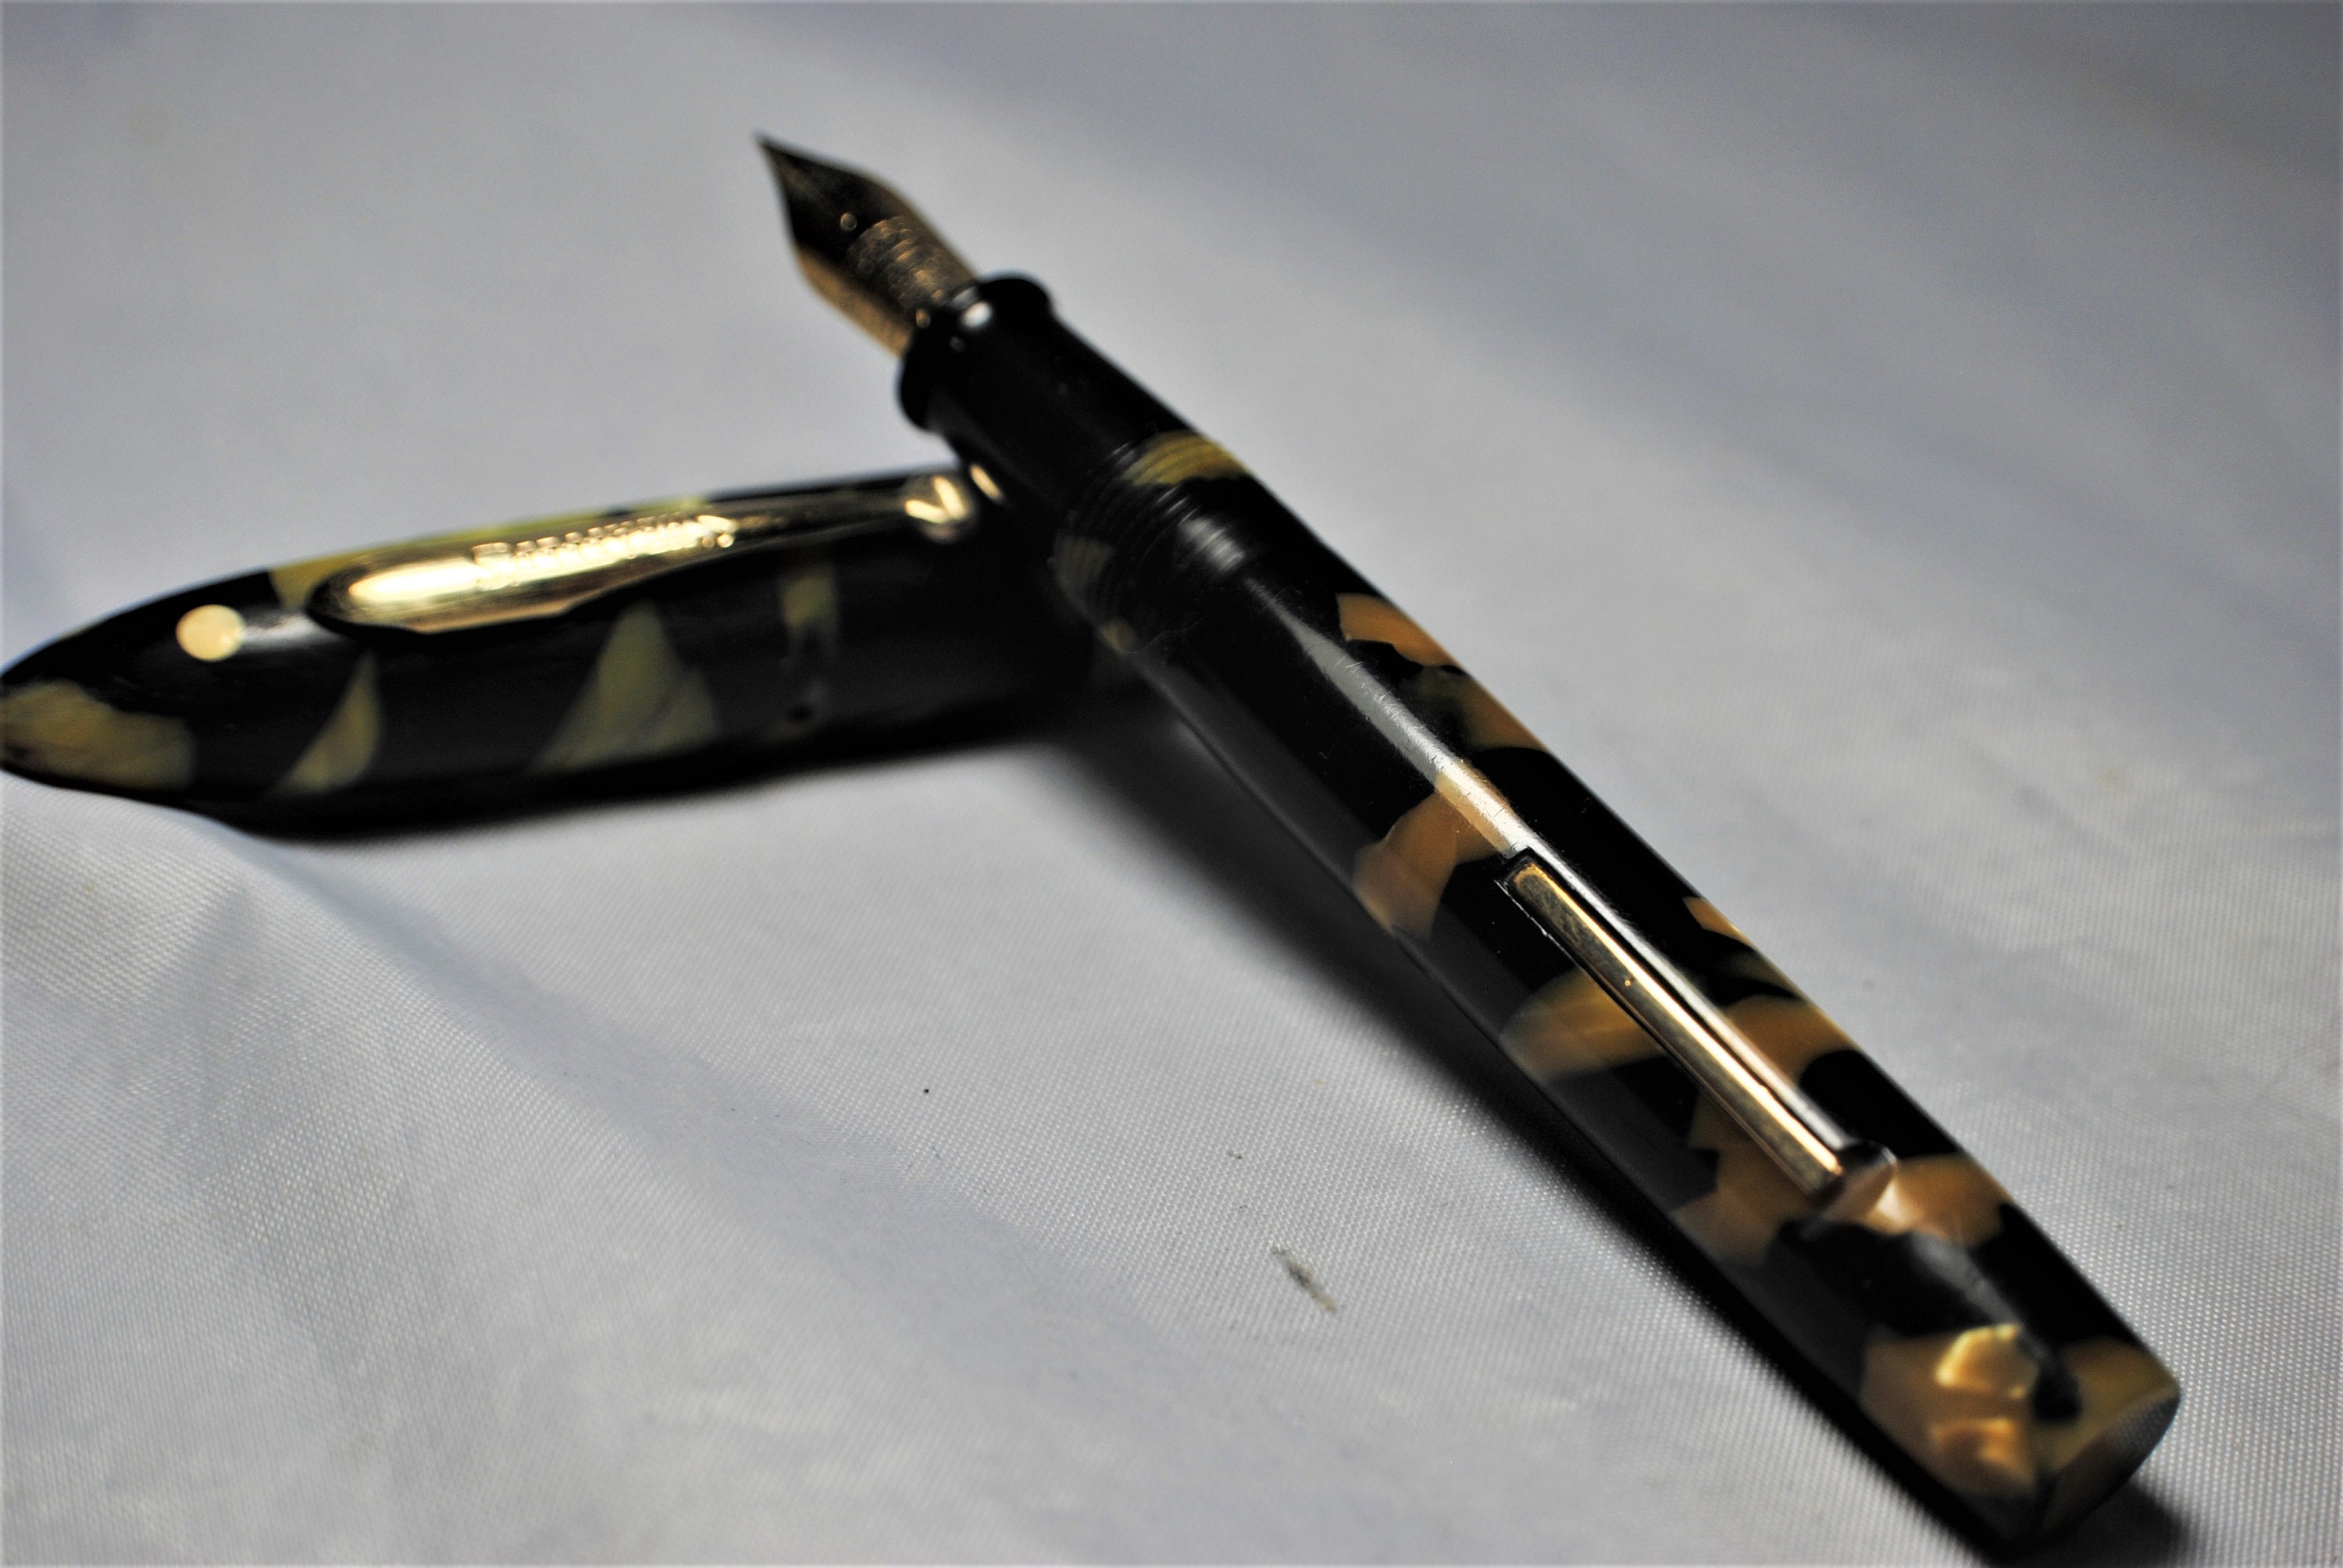 Vintage Sheaffer Fountain Pen With 14k Gold Nib and Retracting Pencil Set 